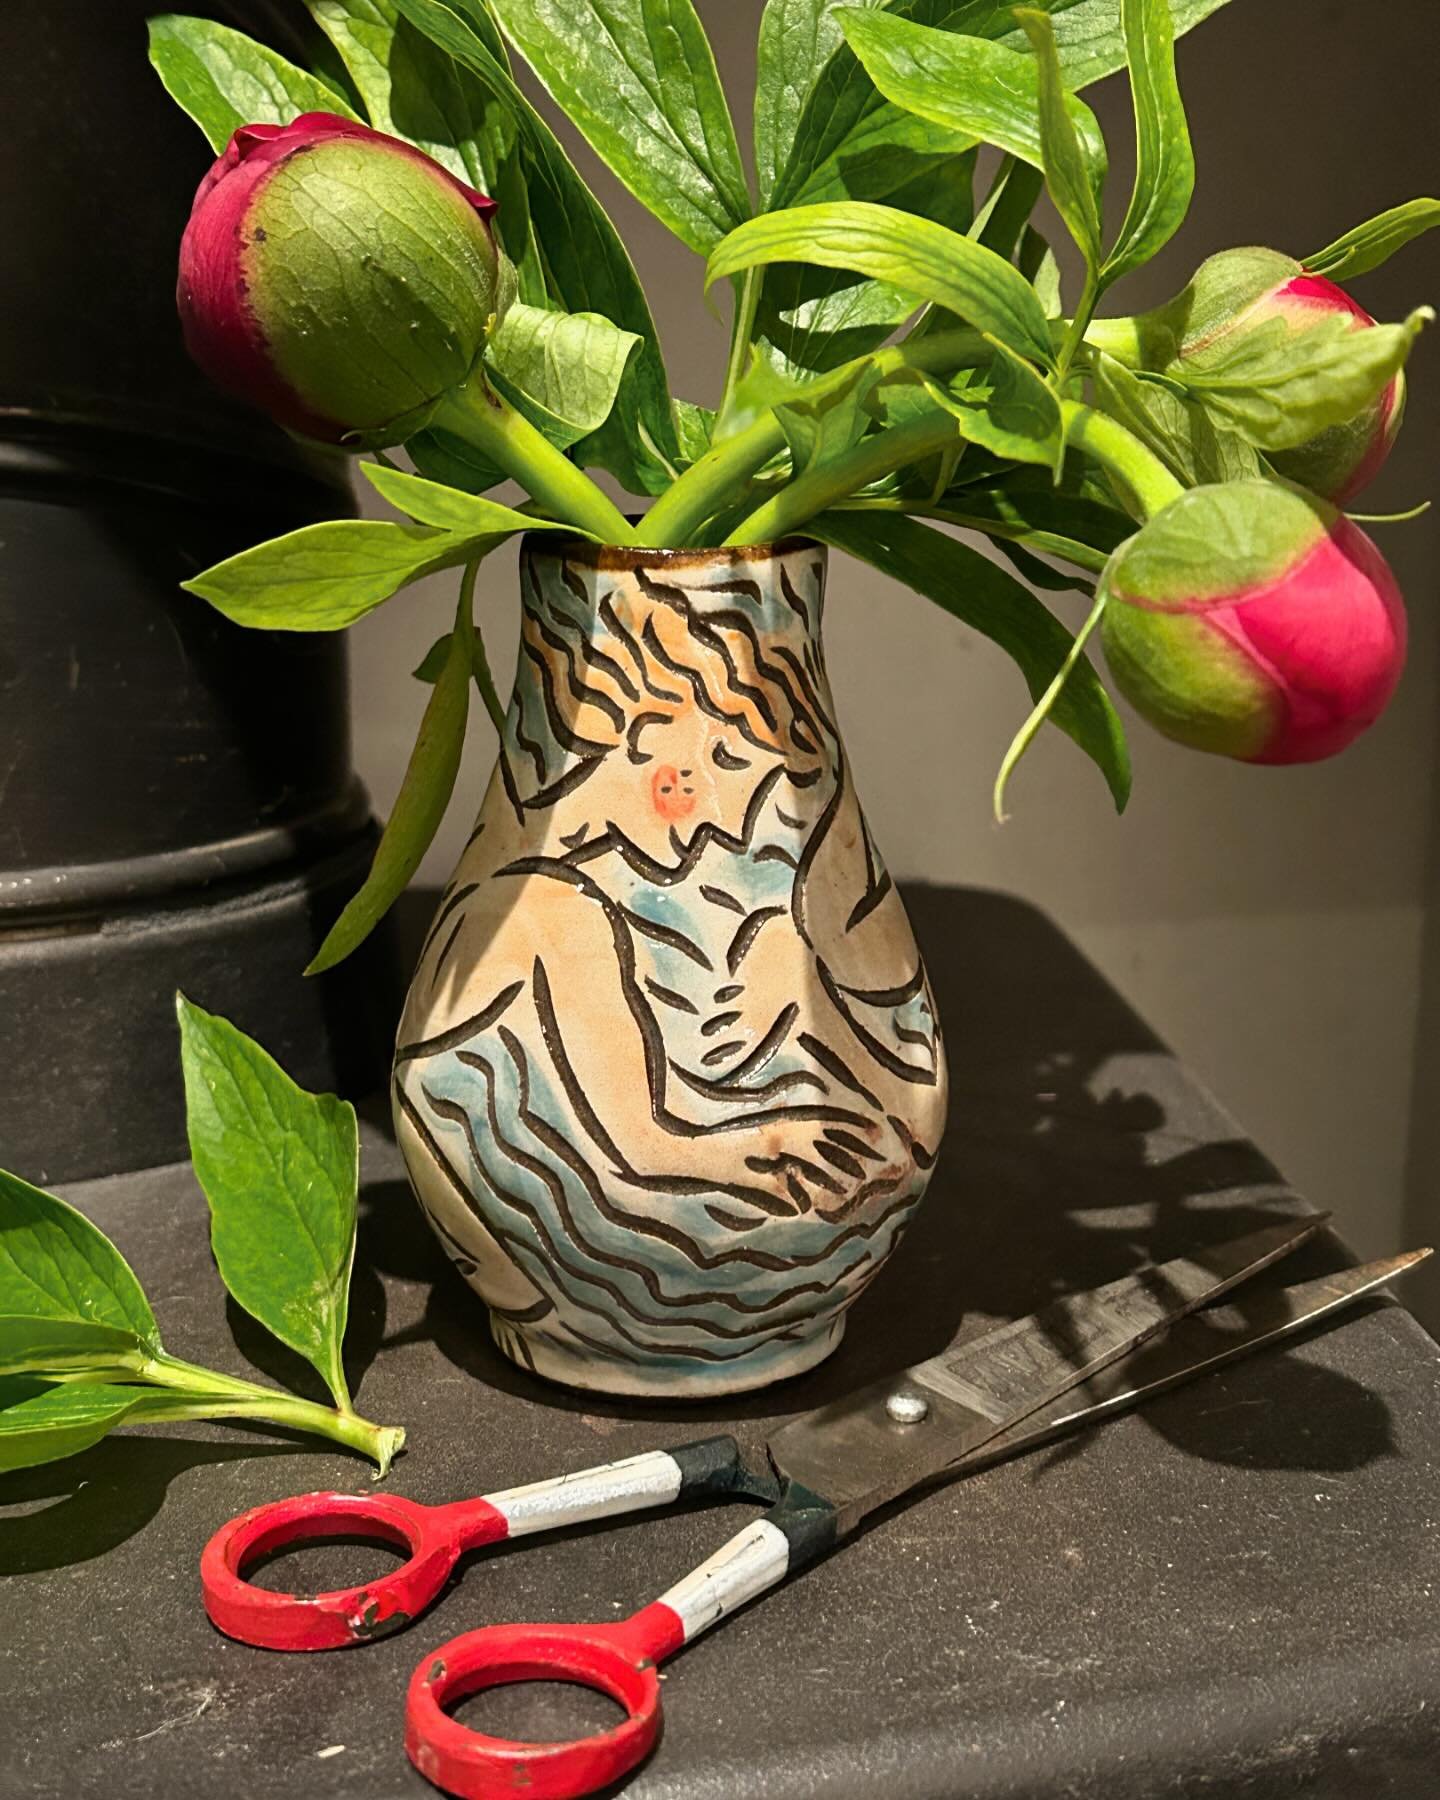 Saved some peonies that were lying in the road. A good test for one of my new bud vases.
Wonder what their story was &hellip;
.
#peony #budvase #pottery #handmade